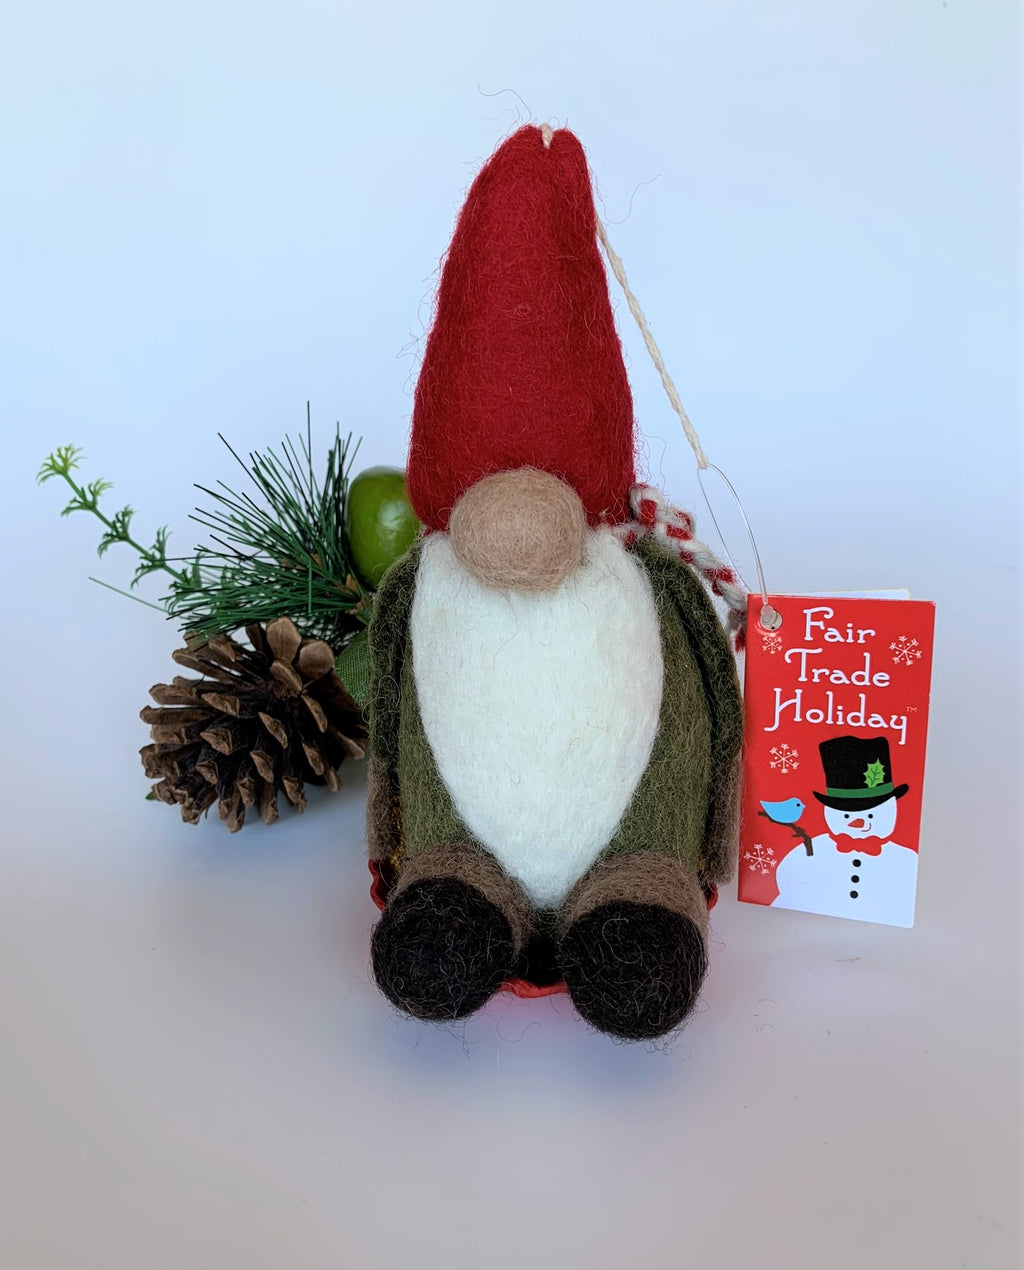 This is the sledding gnome Christmas ornament that is handcrafted (fair trade) and made of 100% natural wool. The sled is handmade using paper that is hardened & feels almost like thin wood. He wears a green top, brownish-gray pants, a pointed red hat, which covers his eyes, a red & white scarf, has a round tan nose & sits on a round, red sled with gold colored sled handles on either side. Approximately 6.5"x3.75"x3.5". He comes with a fair trade holiday "to/from" tag to use if giving this as a gift.